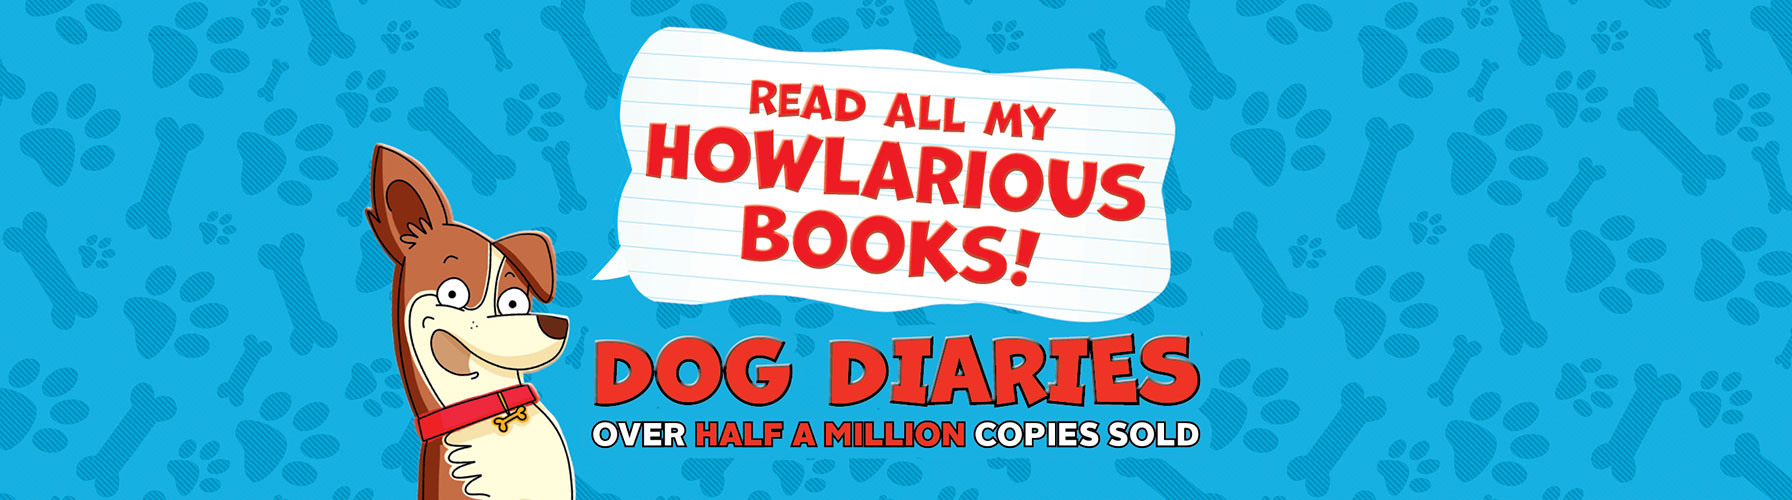 Dog Diaries over half a million copies sold